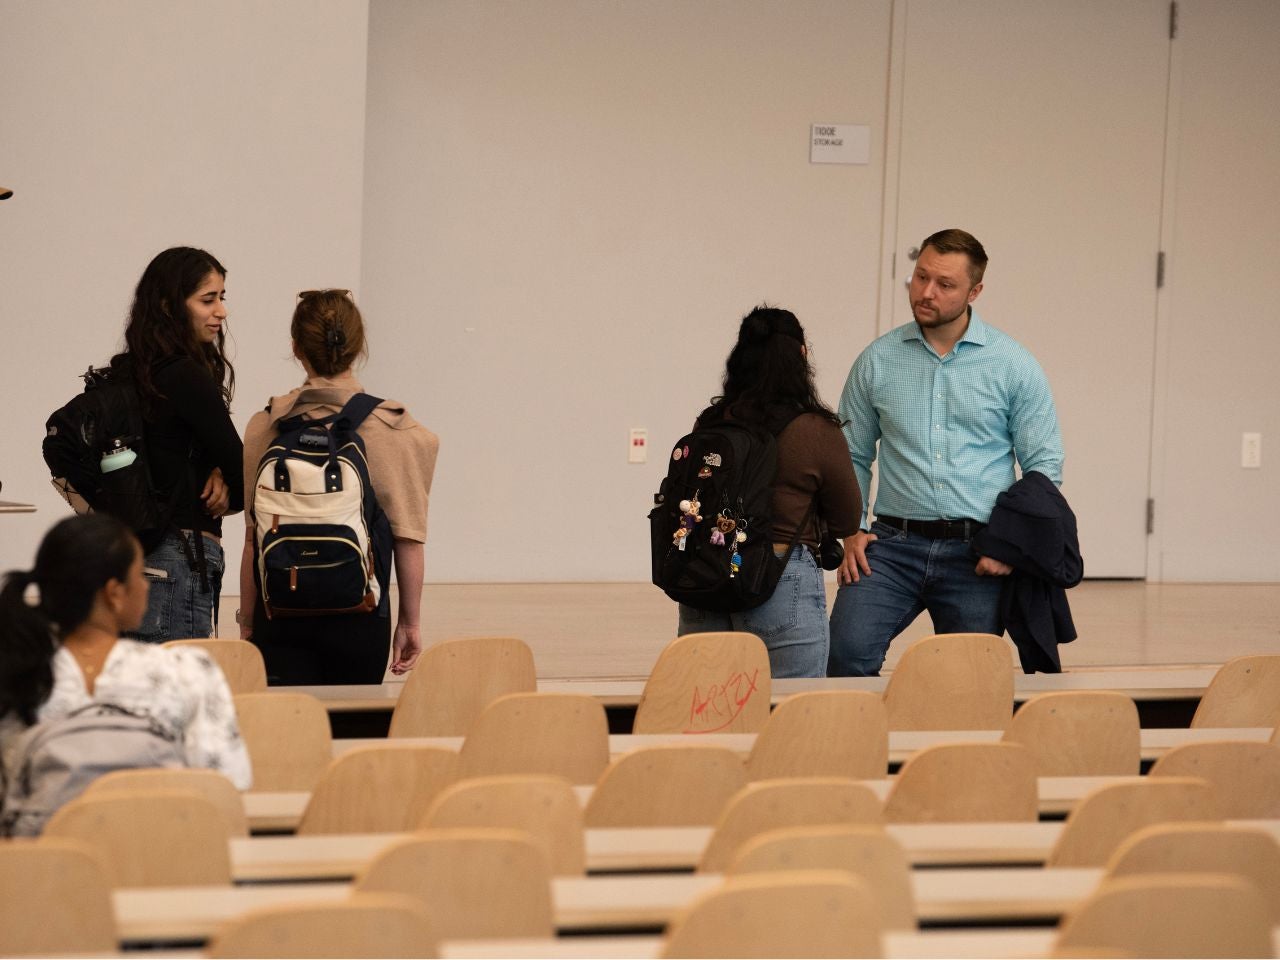 Faculty Lecturer Spencer Kiesel stands in conversation with several students at the front of a lecture hall.